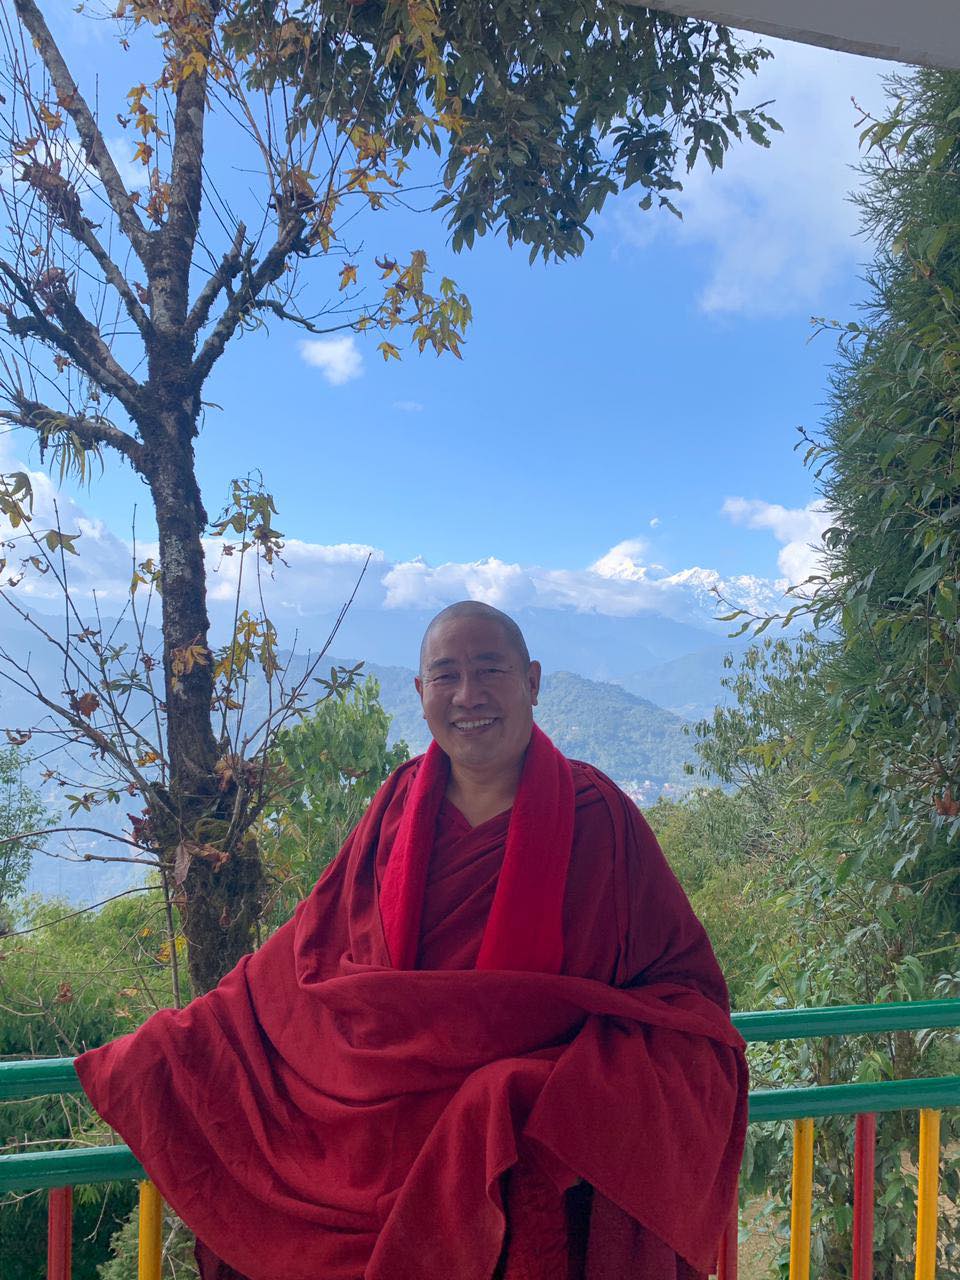 2022 New Year Message from Khen Rinpoche Kalsang Nyima